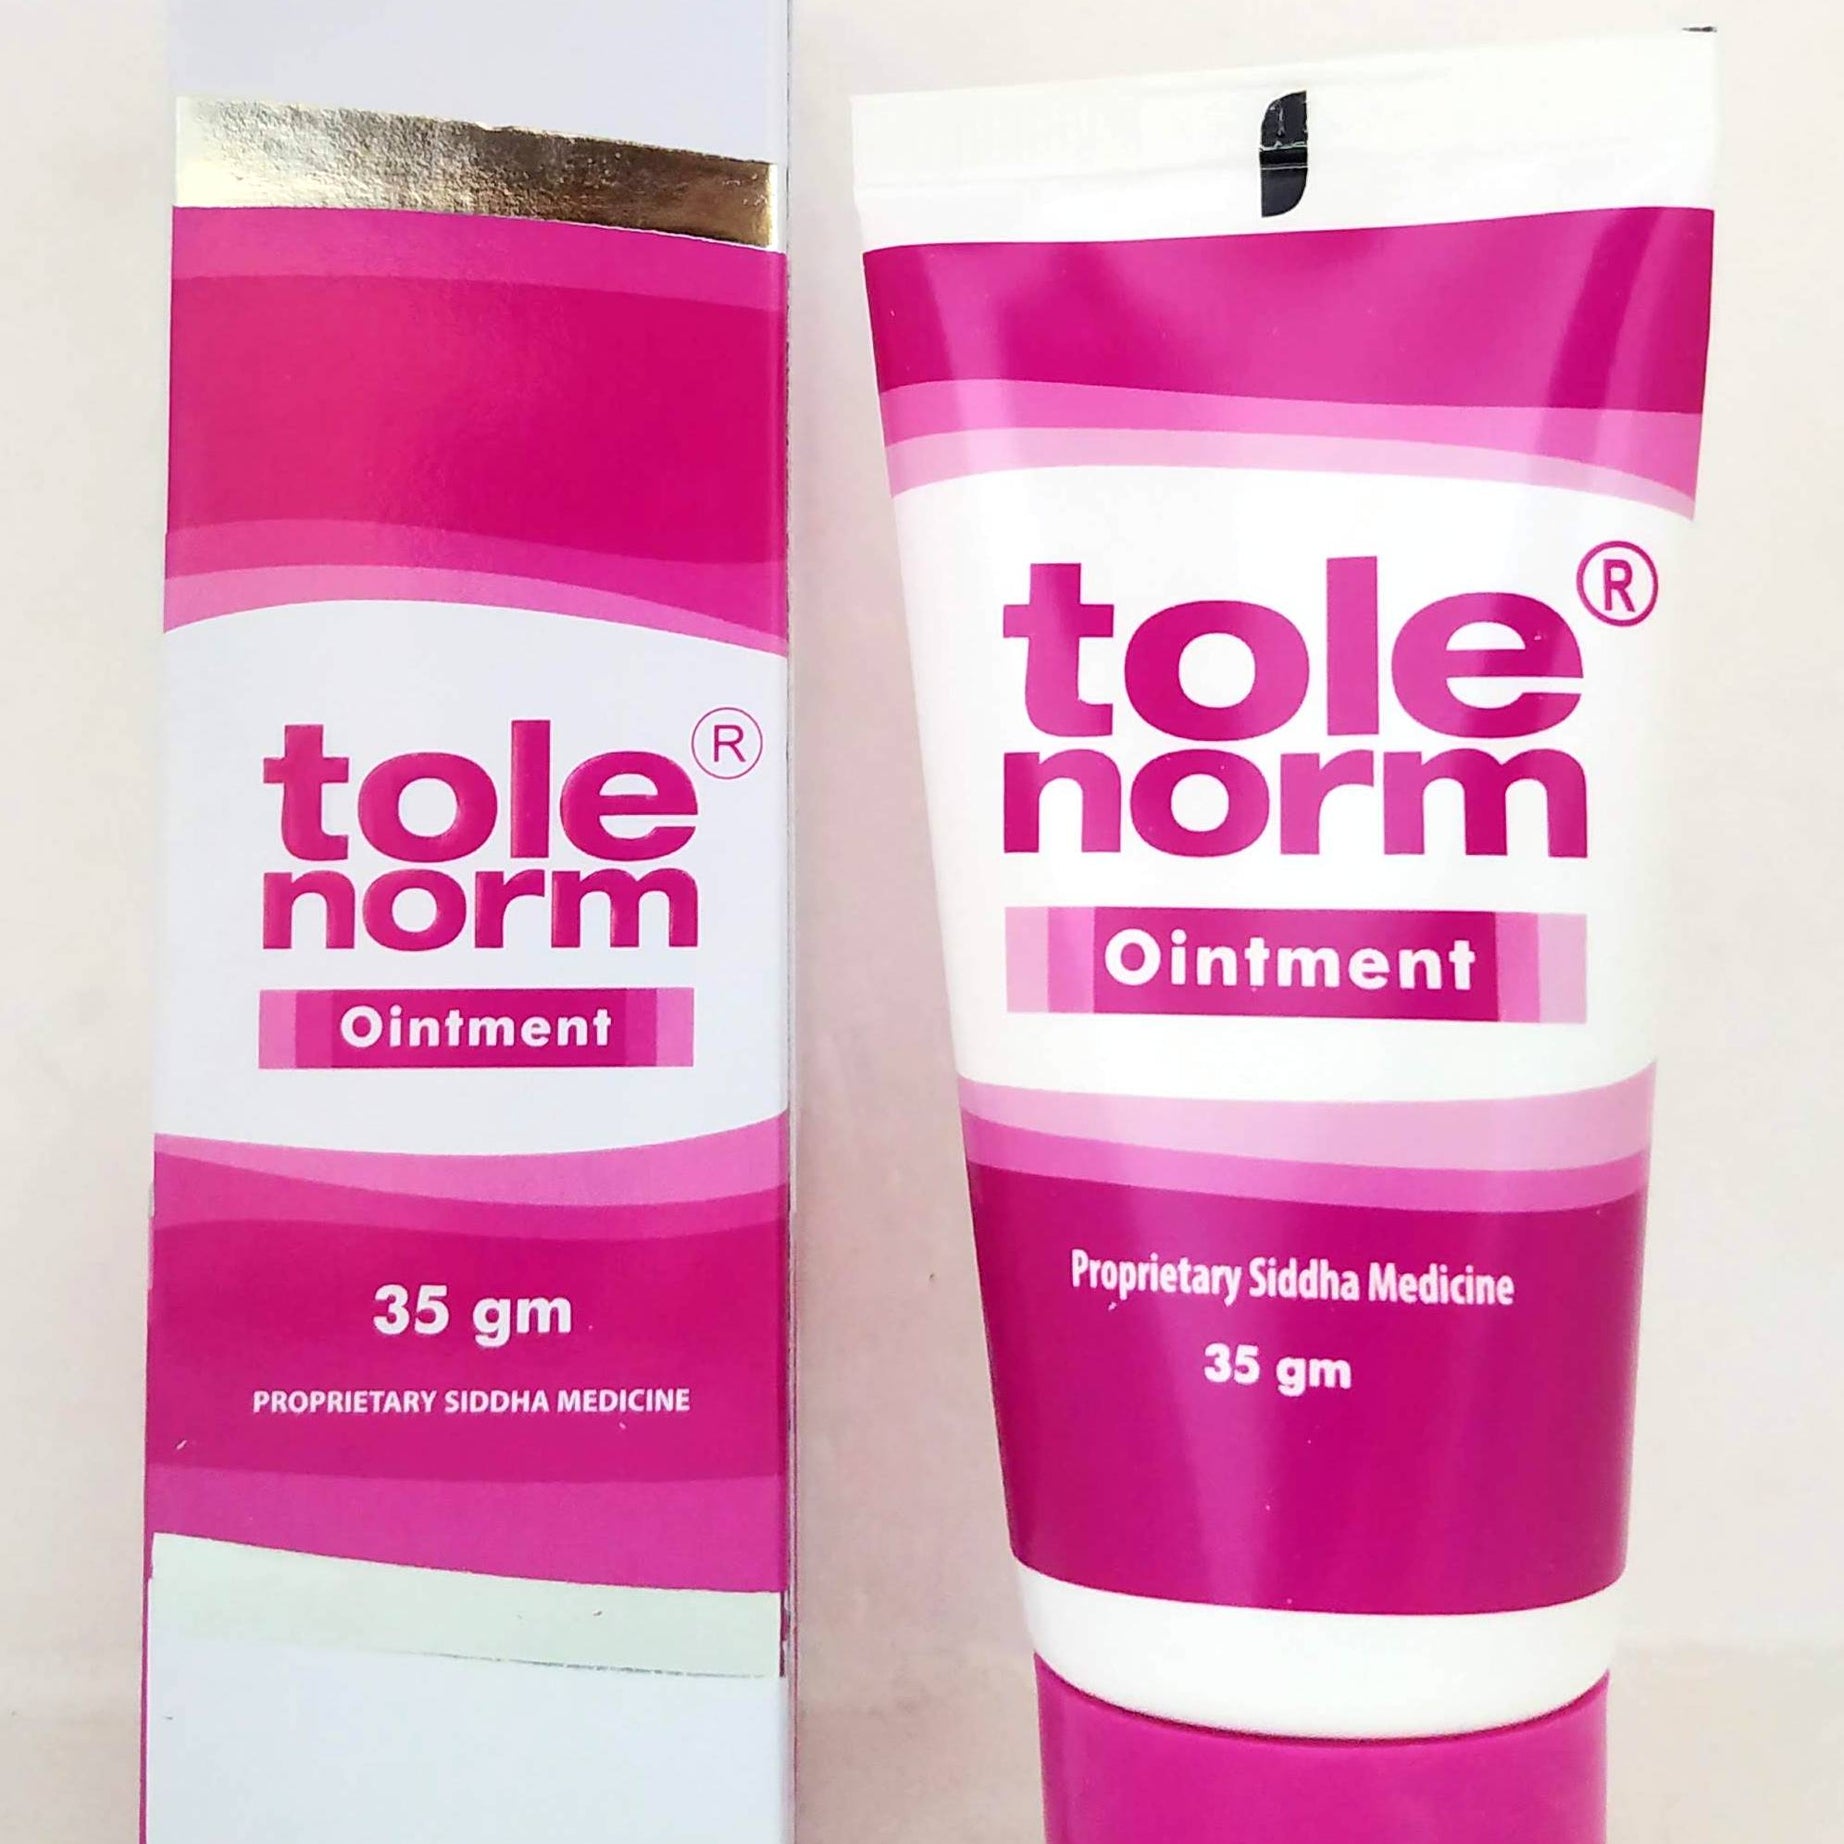 Shop Tolenorm Ointment 35gm at price 200.00 from Dr.JRK Online - Ayush Care